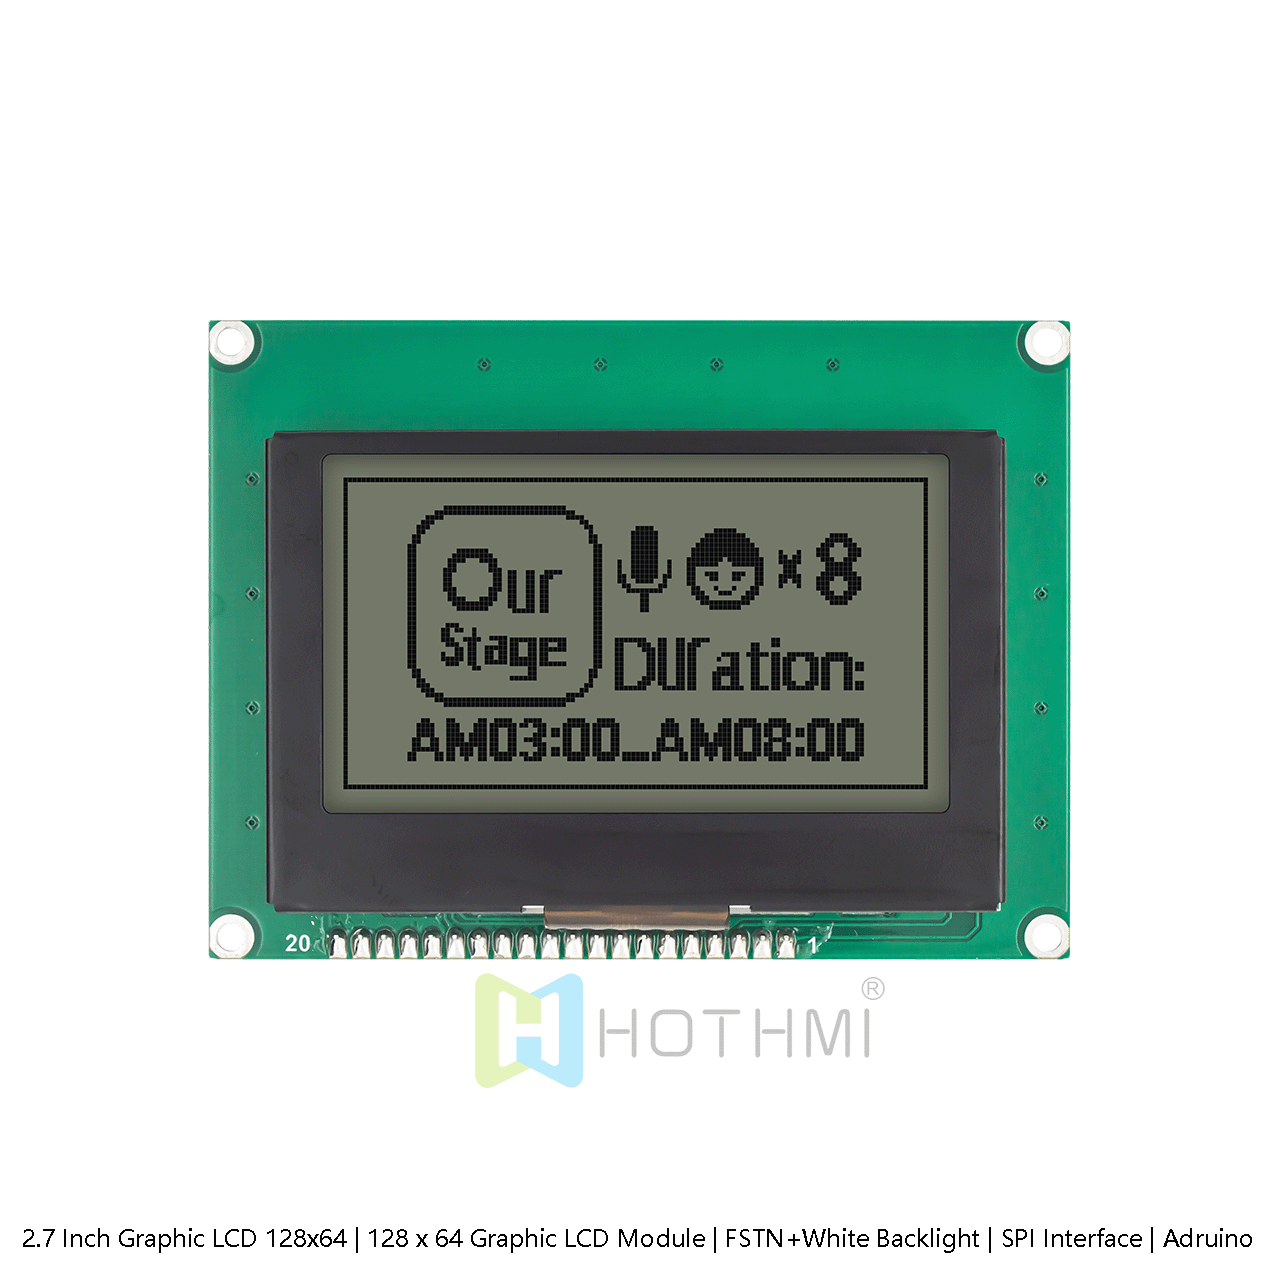 2.7 Inch Graphic LCD 128x64 | 128 x 64 Graphic LCD Module | FSTN+White Backlight | SPI Interface | Adruino | White Background with Gray Text